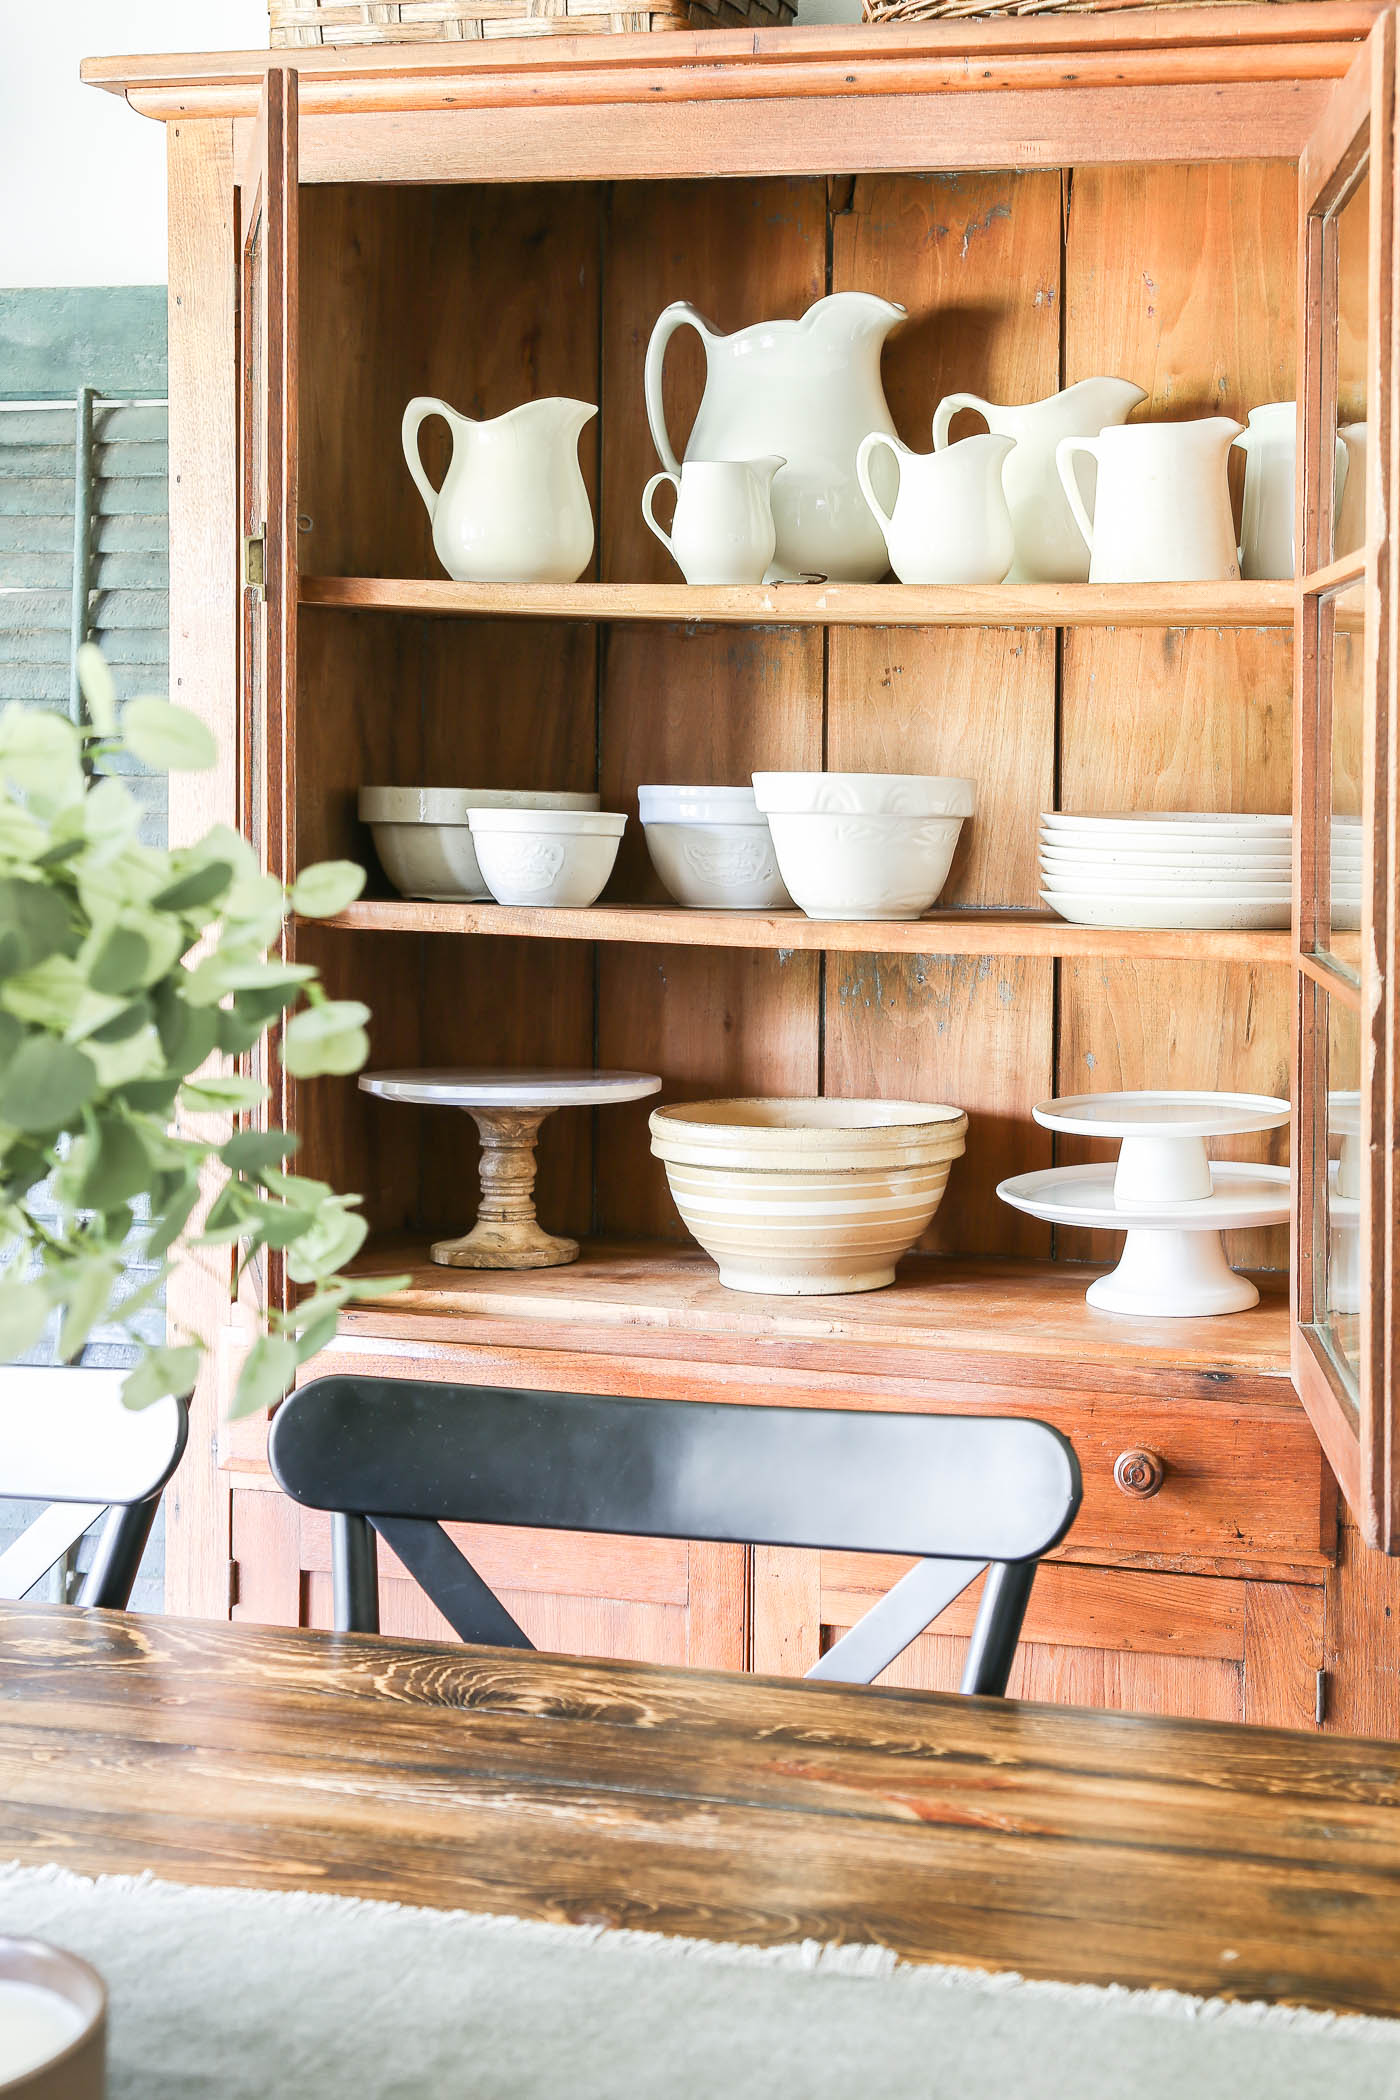 Vintage Finds Perfect For Rustic Styling